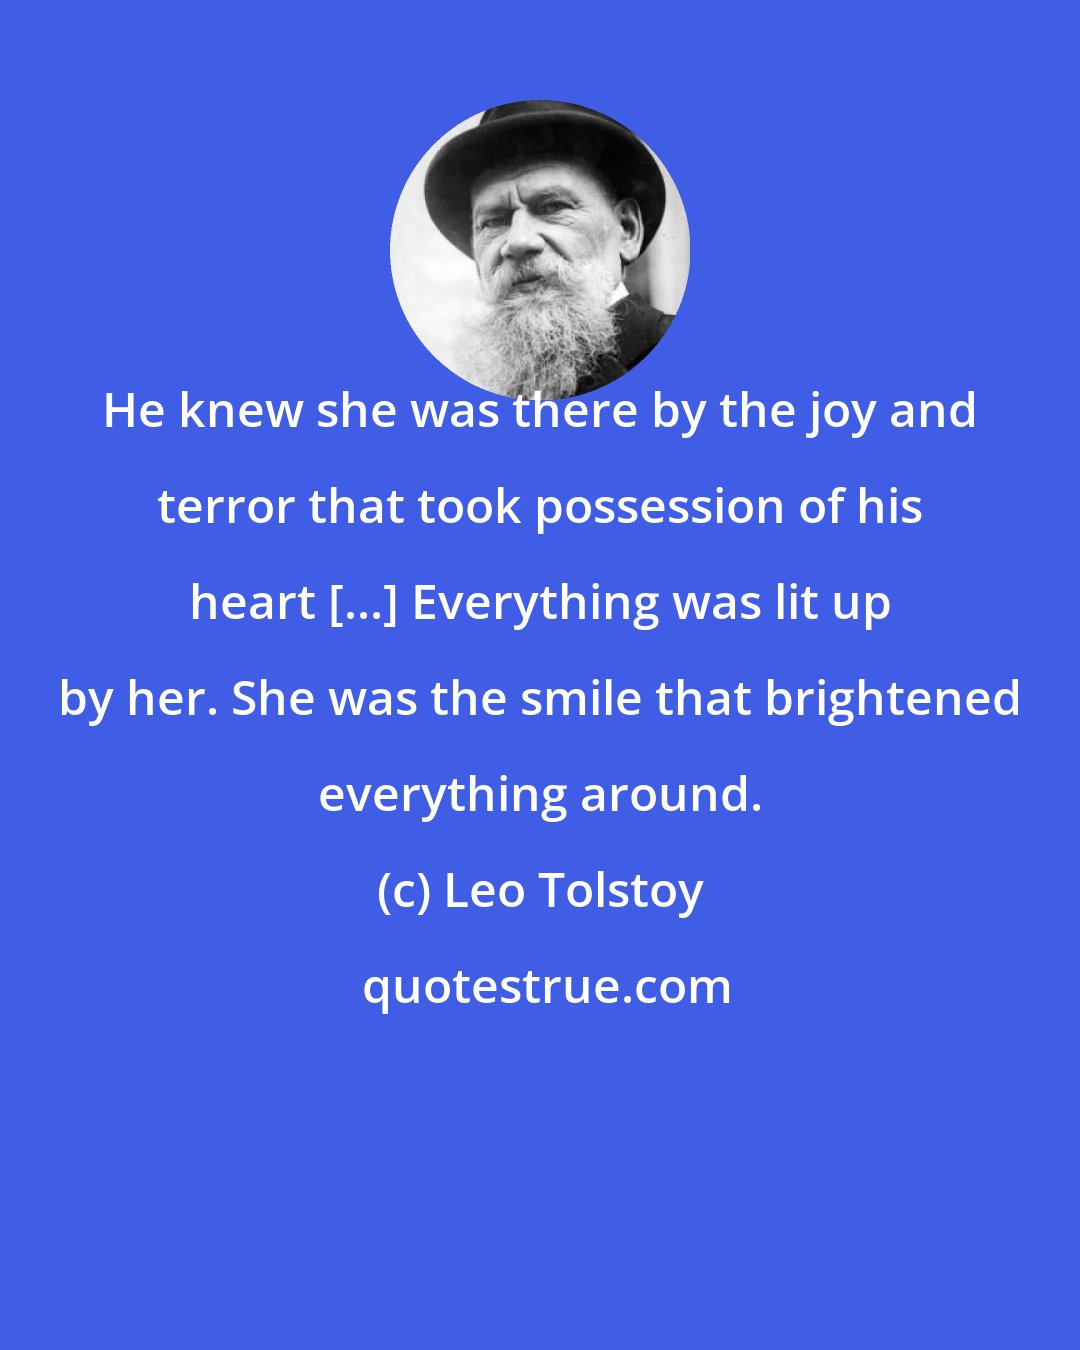 Leo Tolstoy: He knew she was there by the joy and terror that took possession of his heart [...] Everything was lit up by her. She was the smile that brightened everything around.